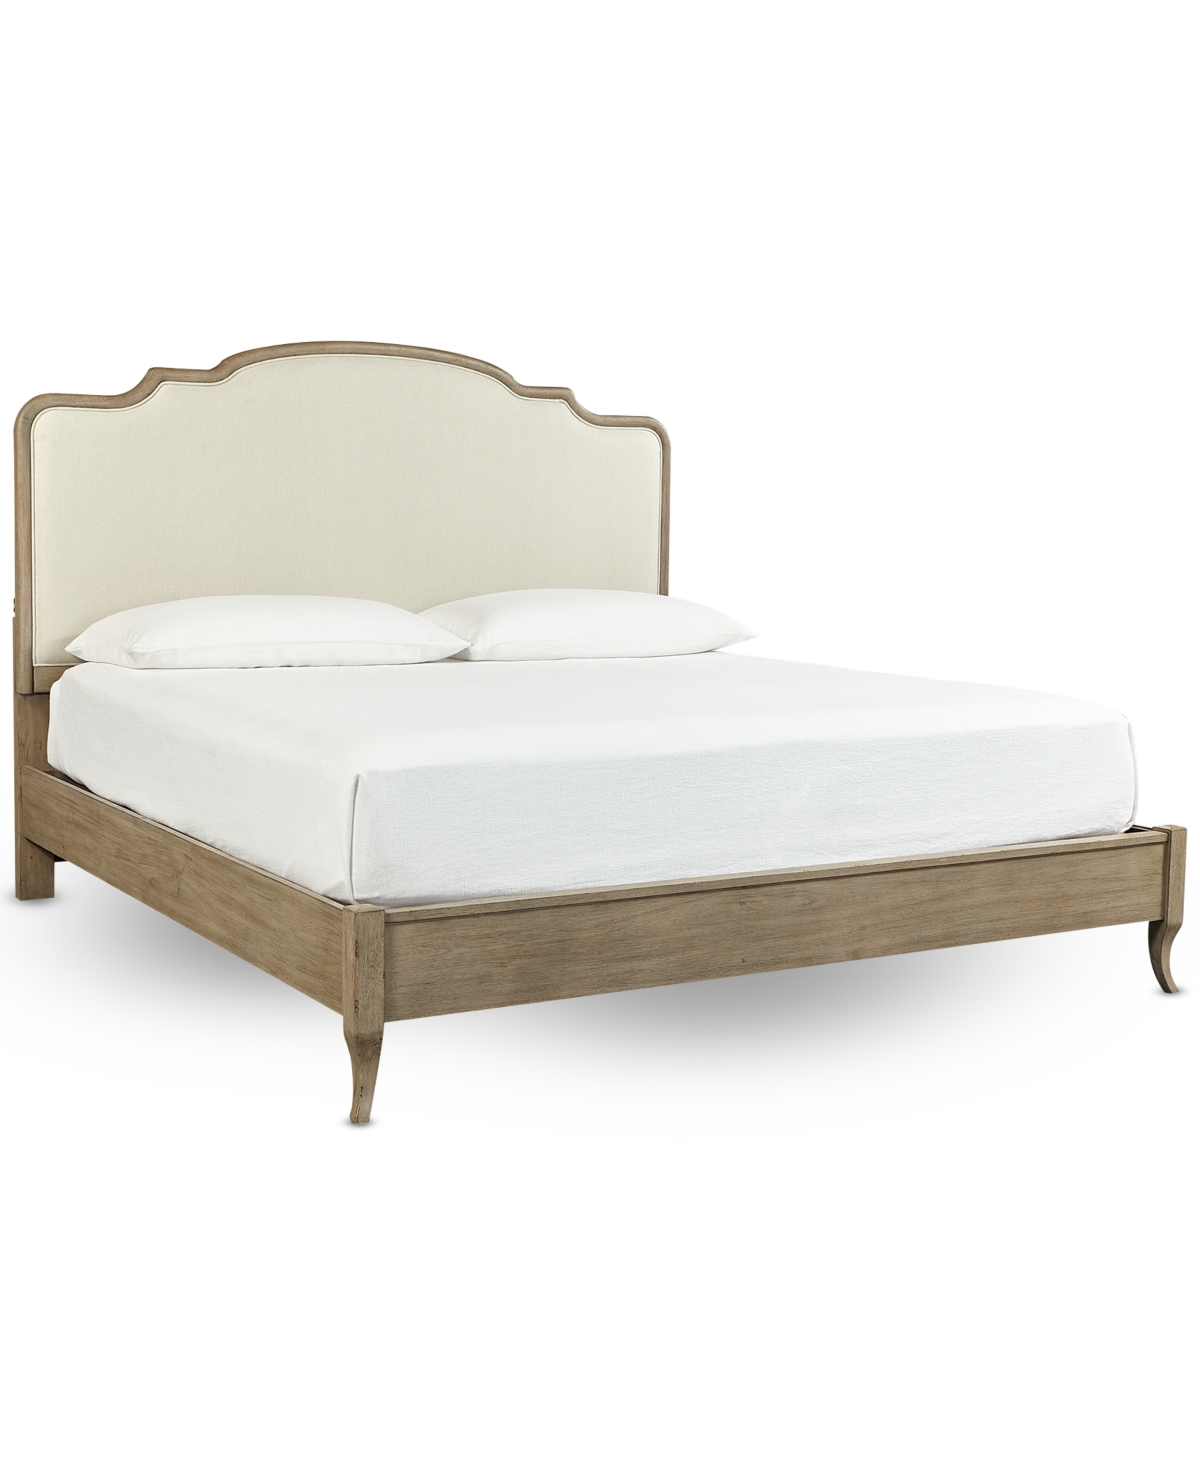 Furniture Provence Upholstered Queen Bed